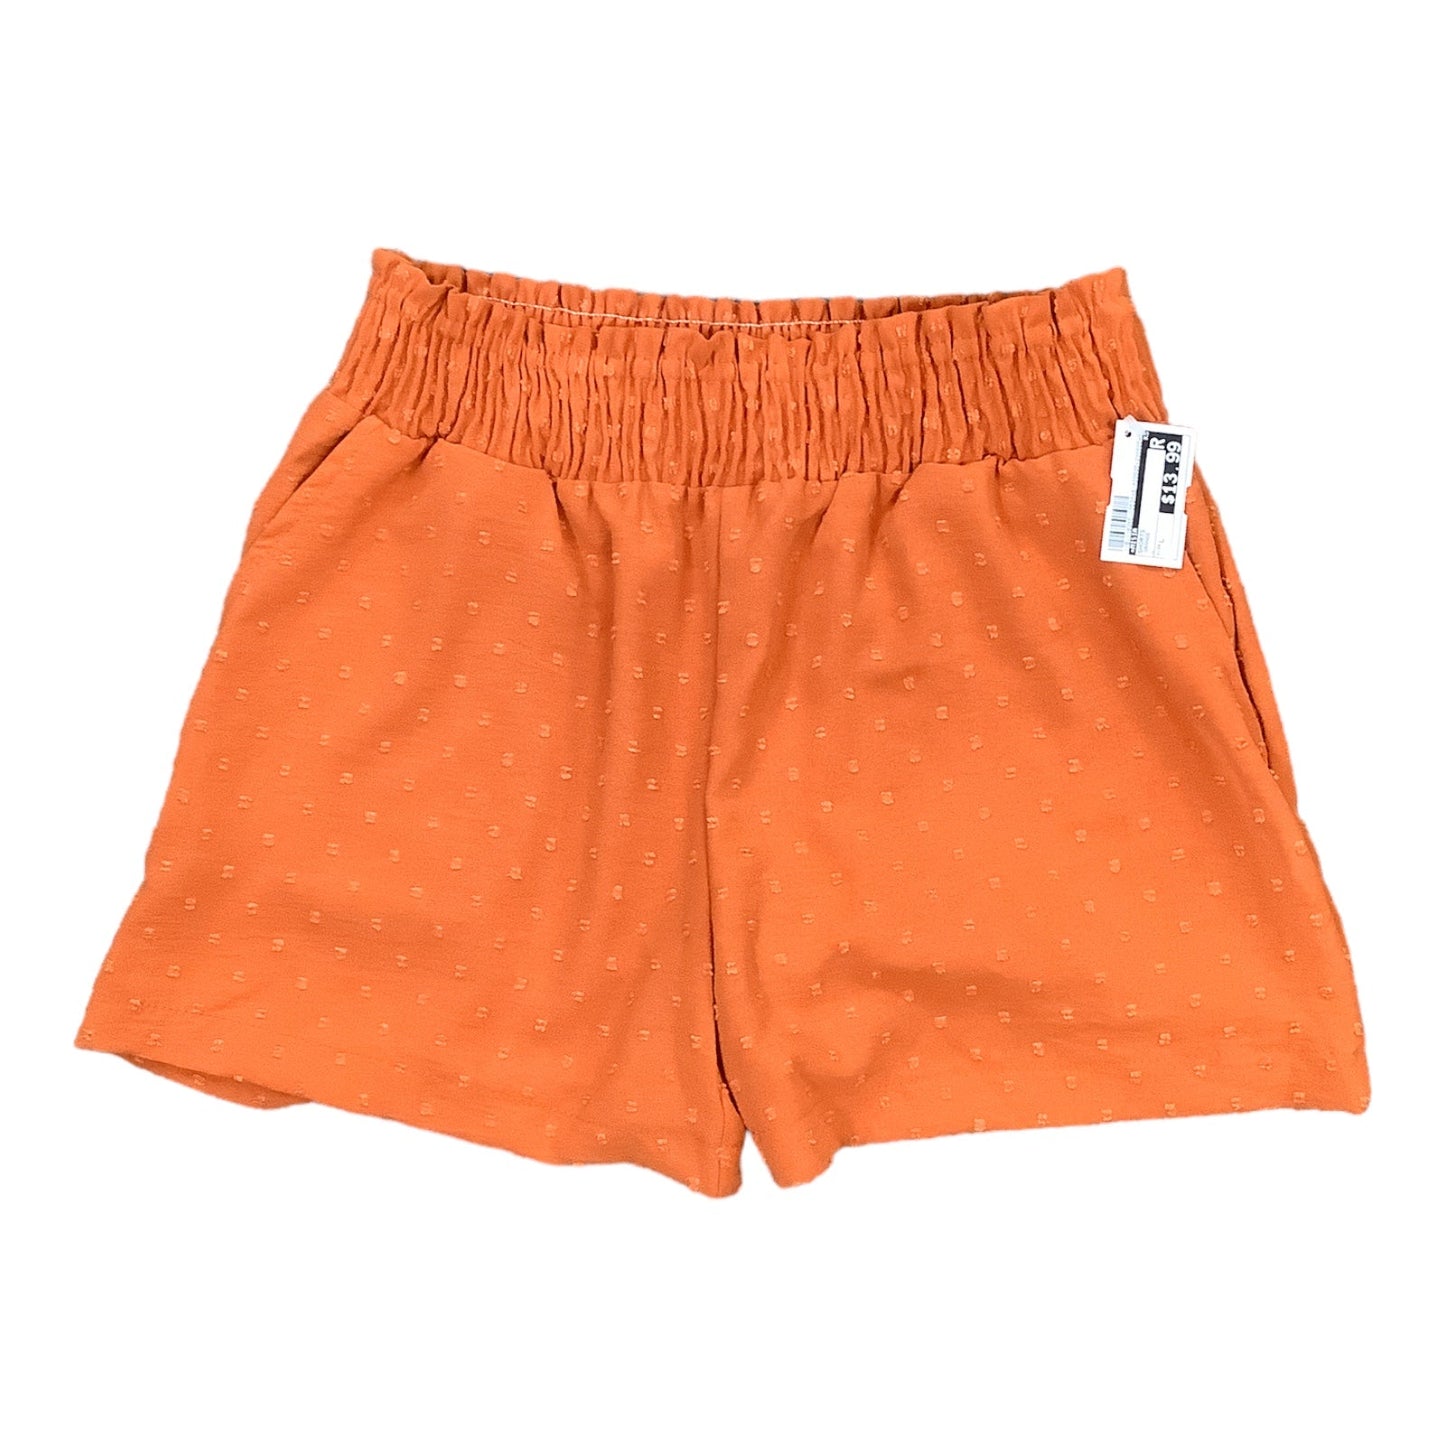 Shorts By Misia  Size: L